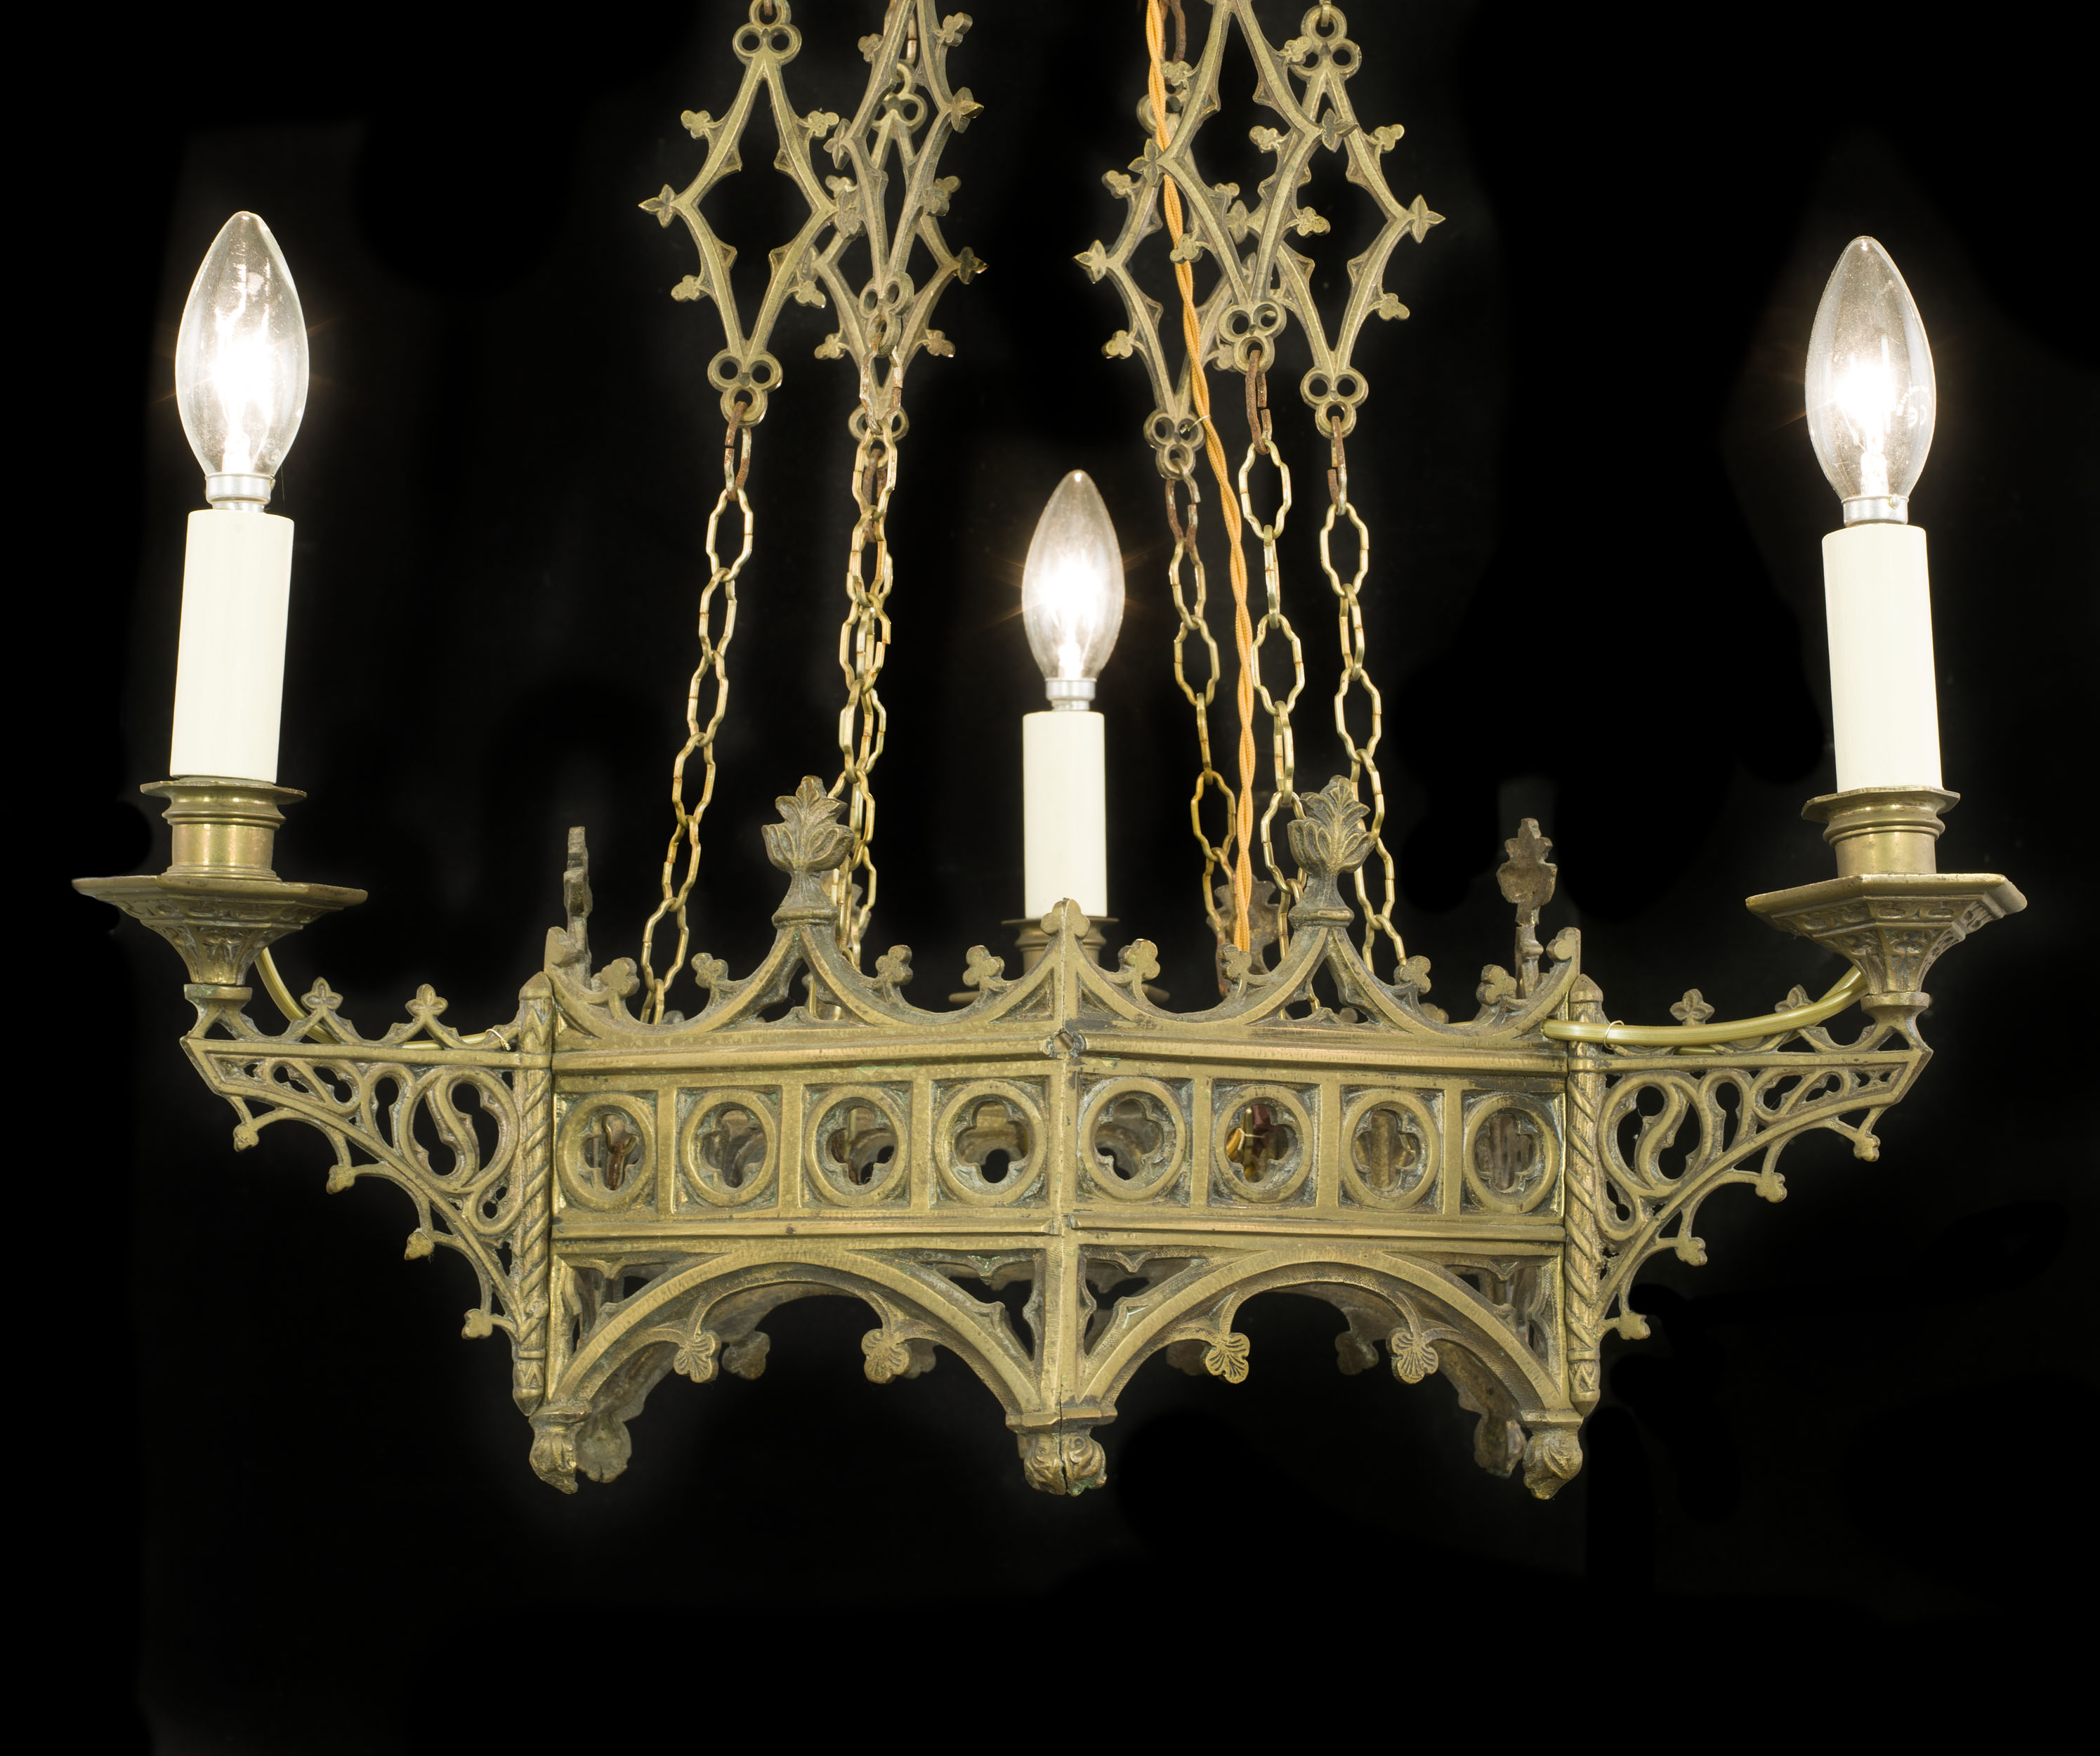  A 19th century Gothic Revival chandelier